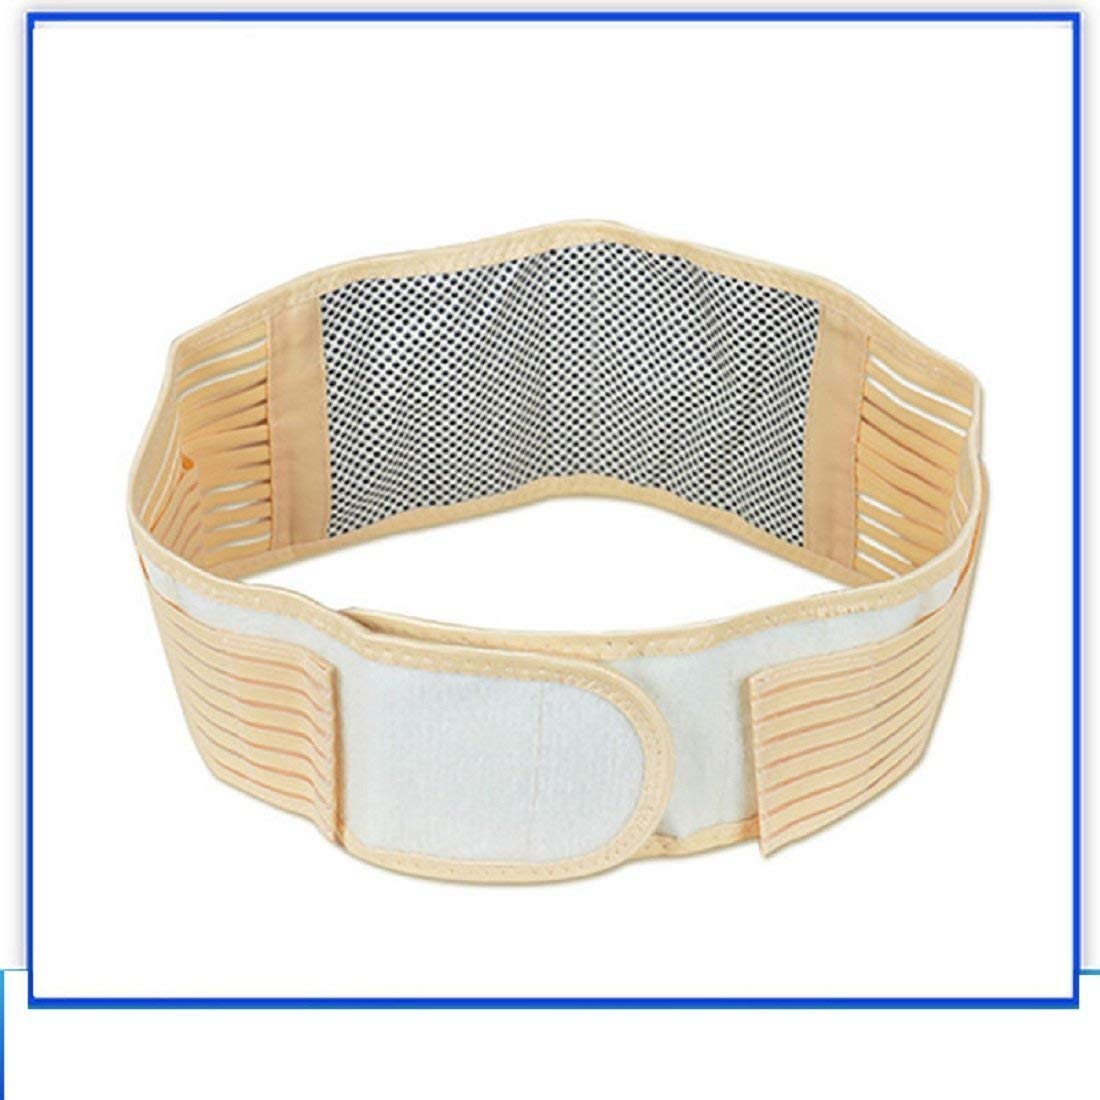 Importikaah’s-Self-Heating-Waist-Support-Belt-for-mind-and-body